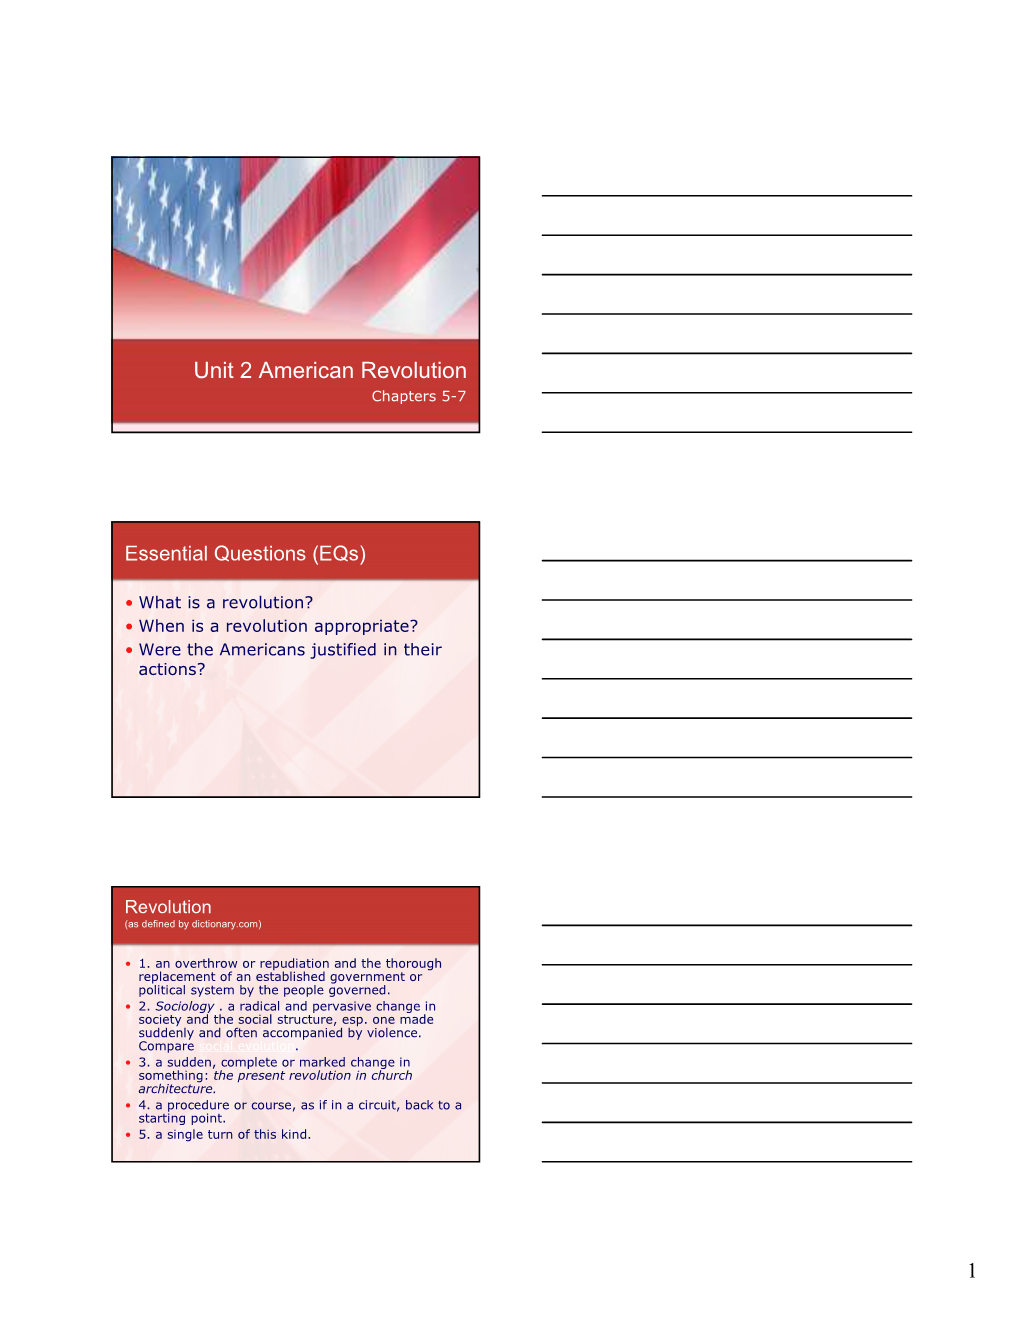 Unit 2 American Revolution Chapters 5-7